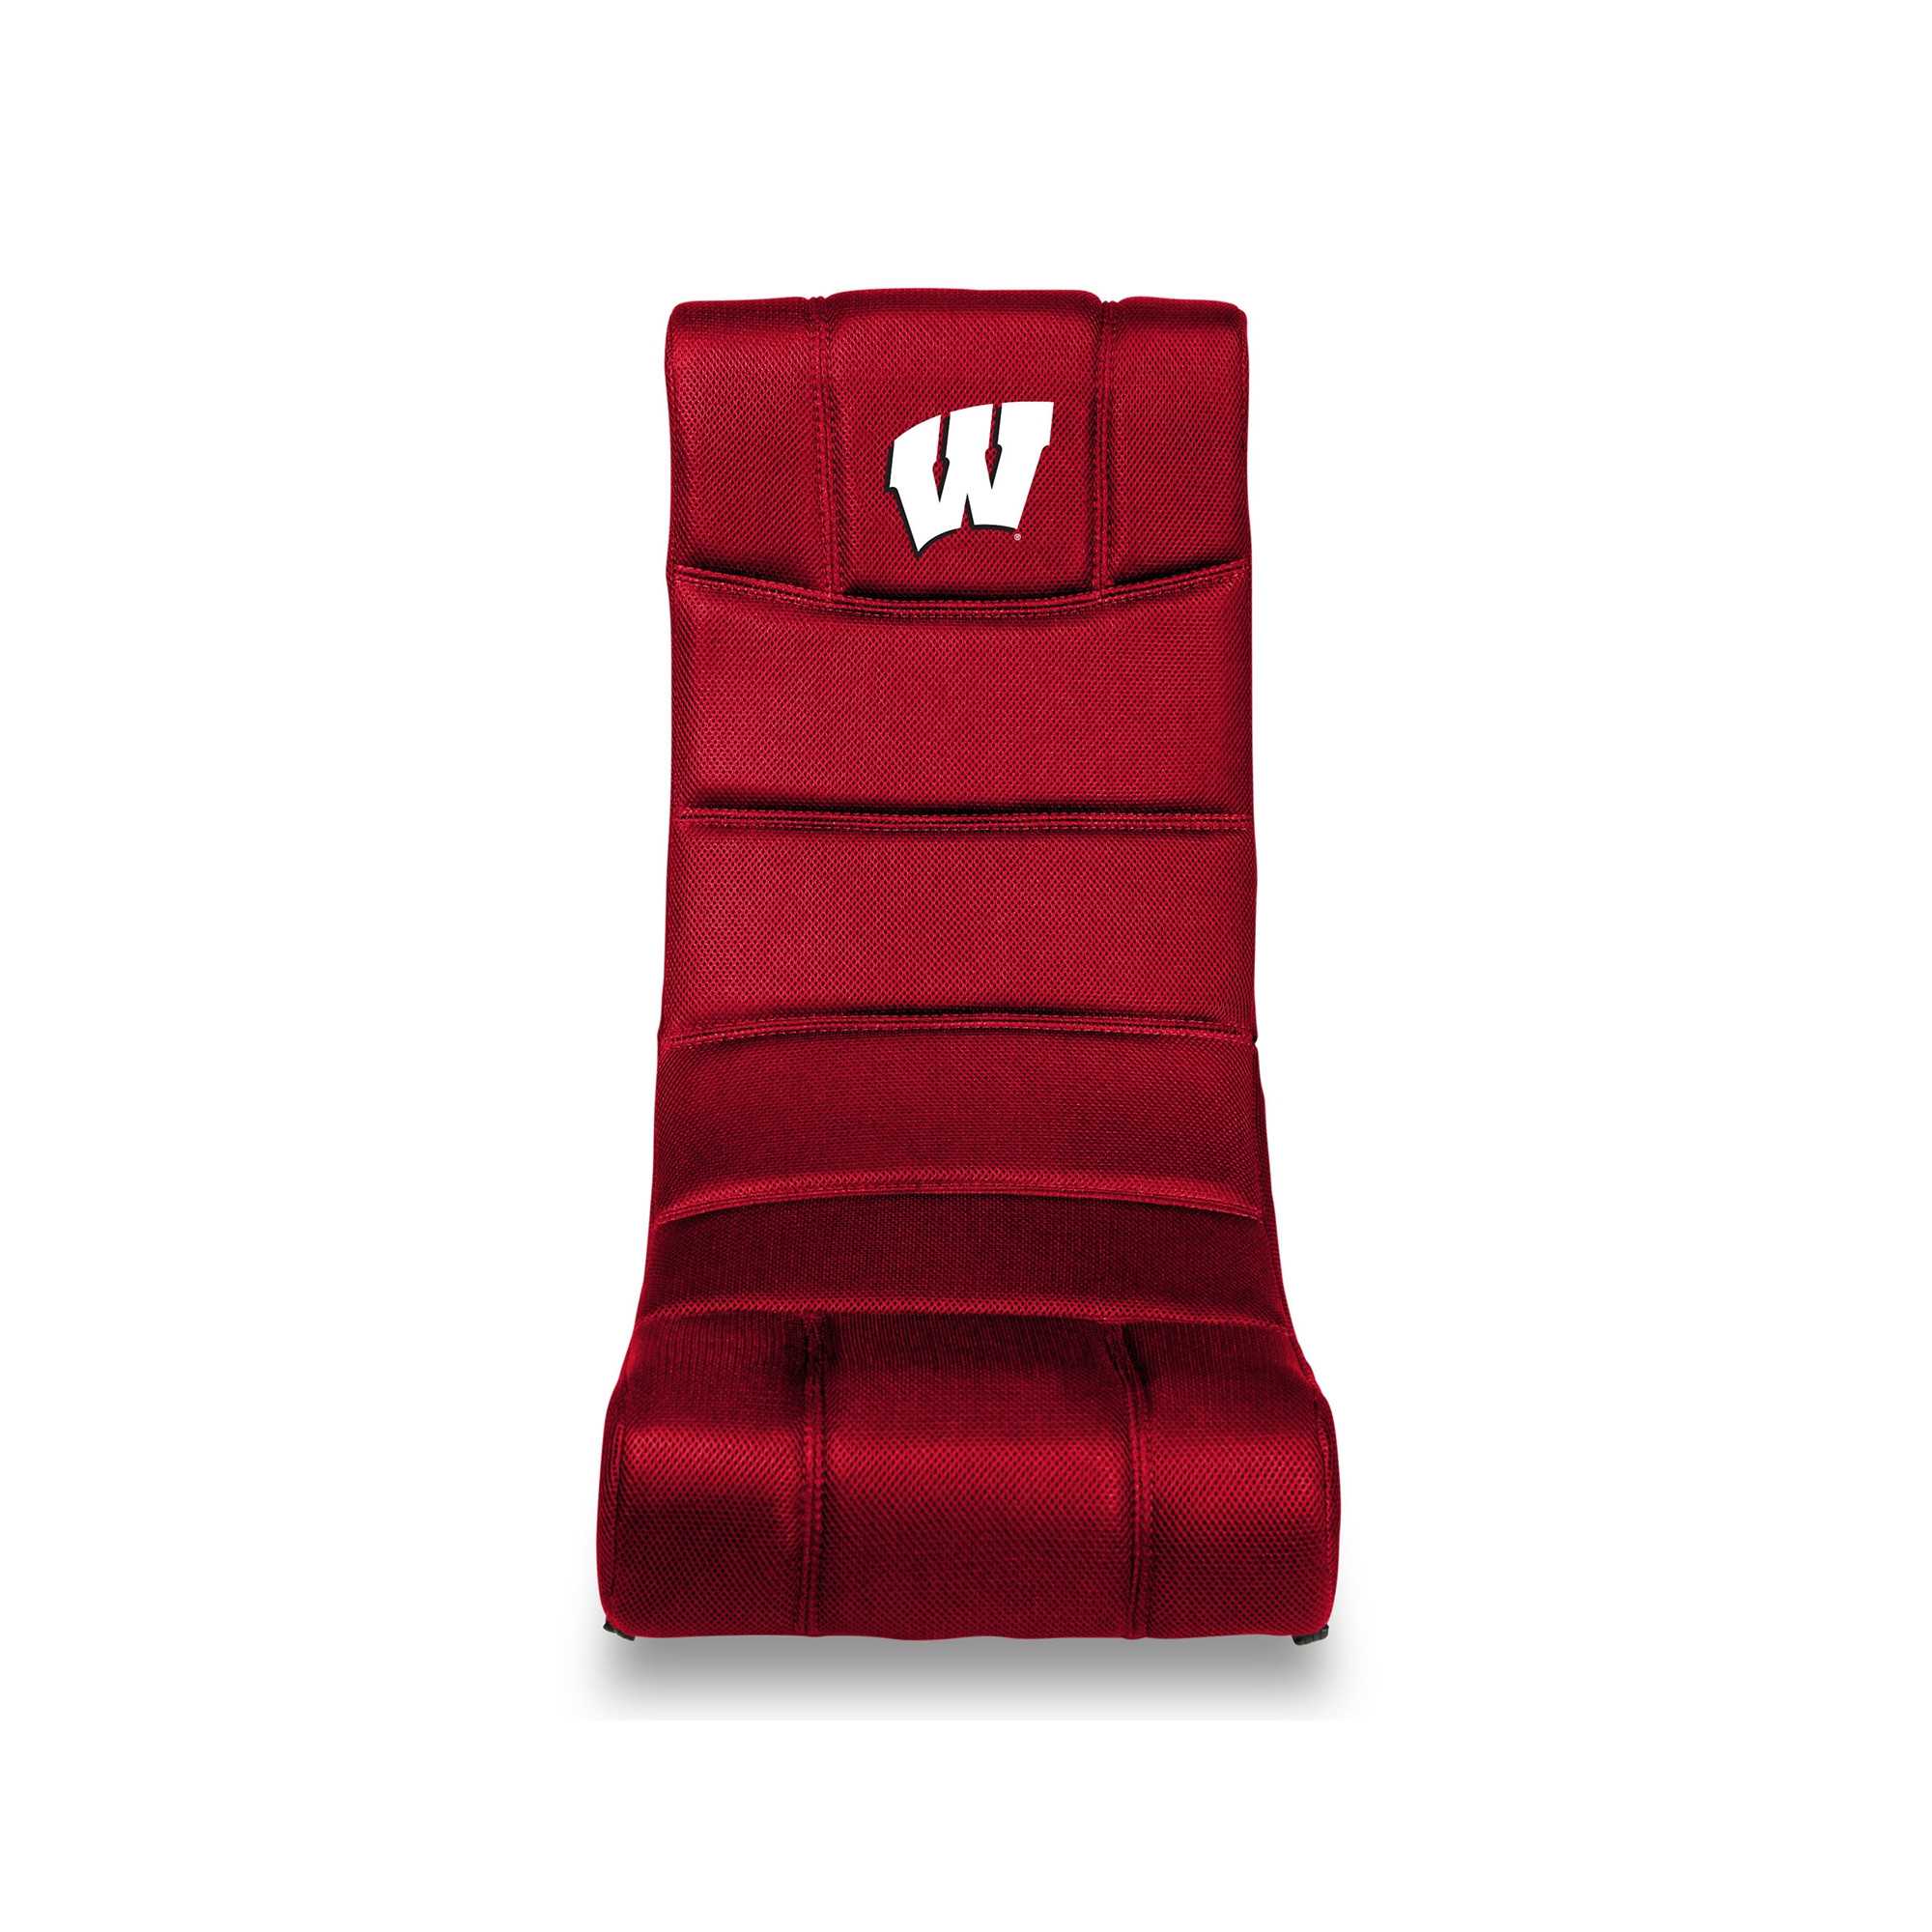 University Of Wisconsin Video Chair With Blue Tooth